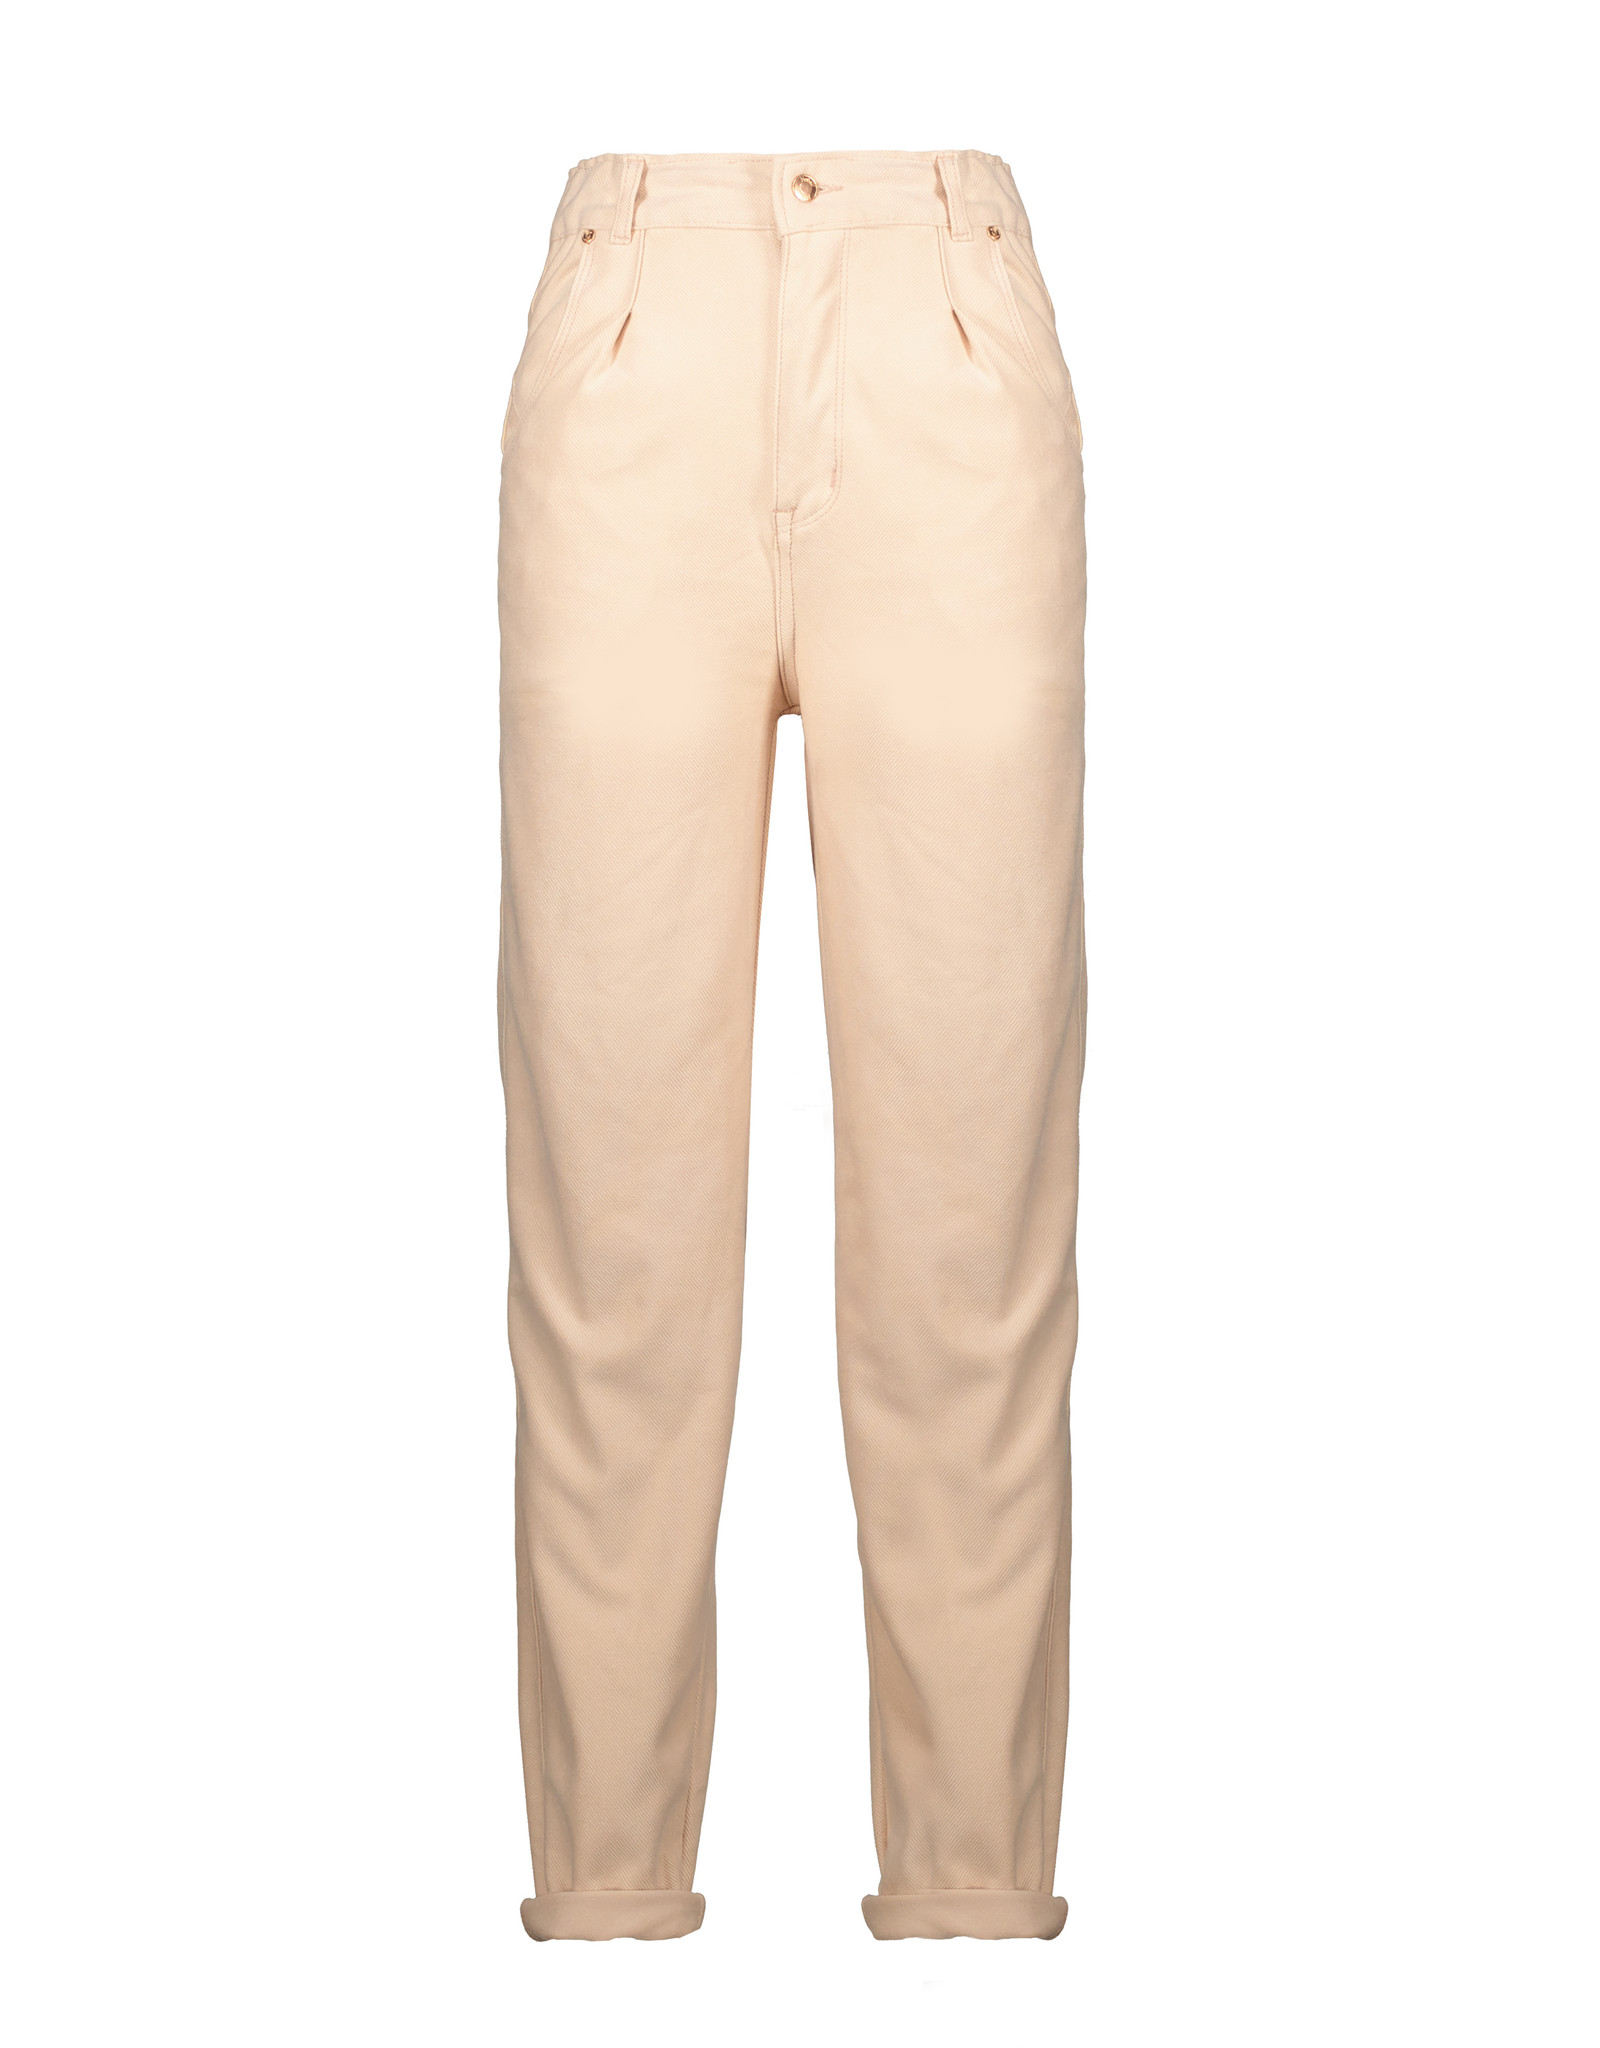 NoBell NoBell pants 3606 pearled ivory